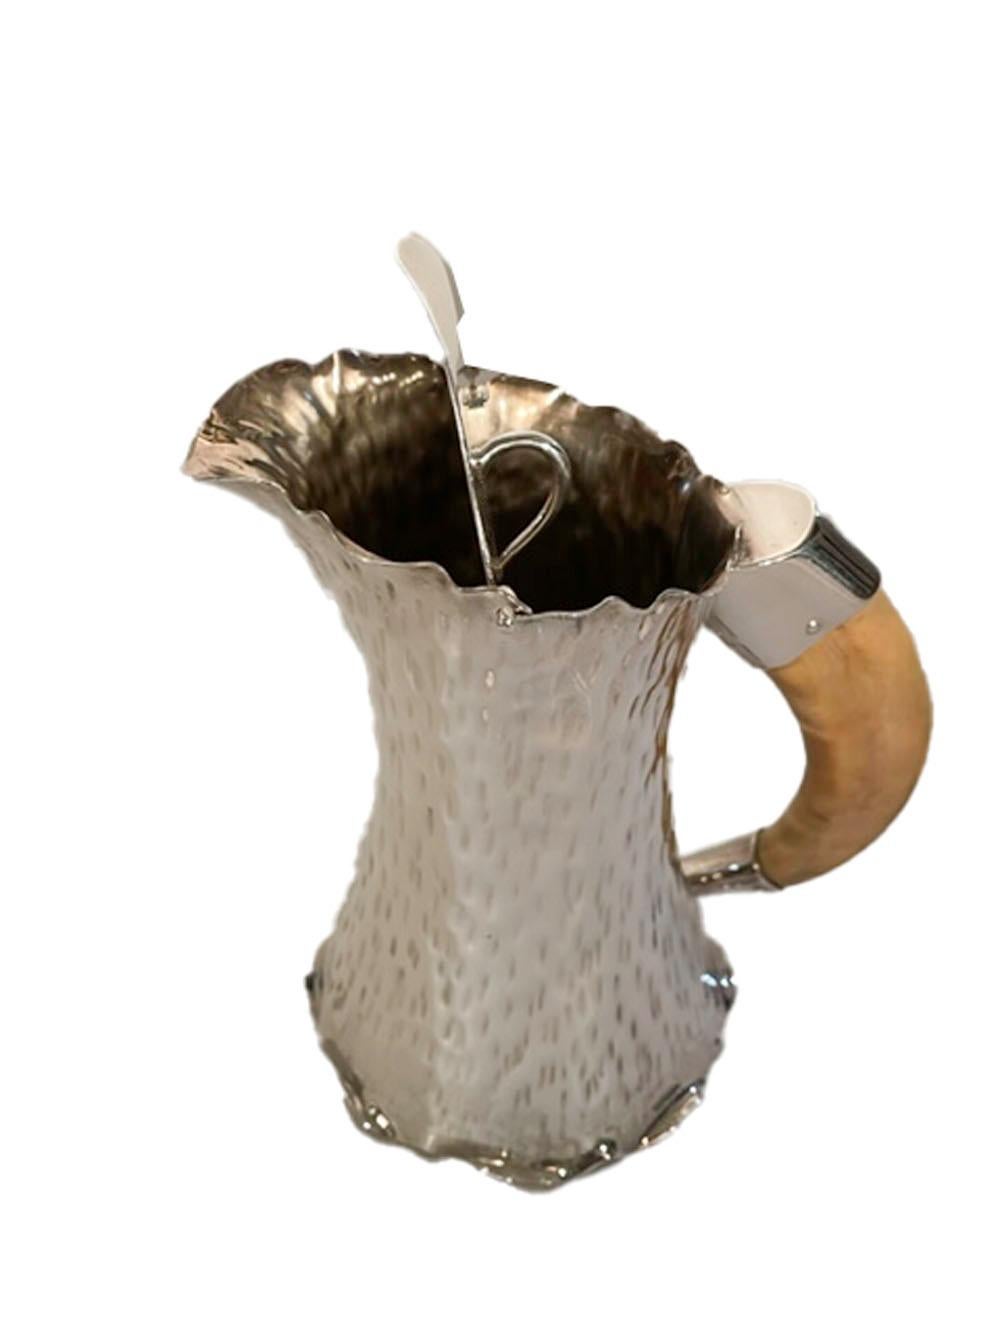 Edwardian Hammered Silver Plate & Boar Tusk Pitcher by Hukin & Heath In Good Condition For Sale In Nantucket, MA